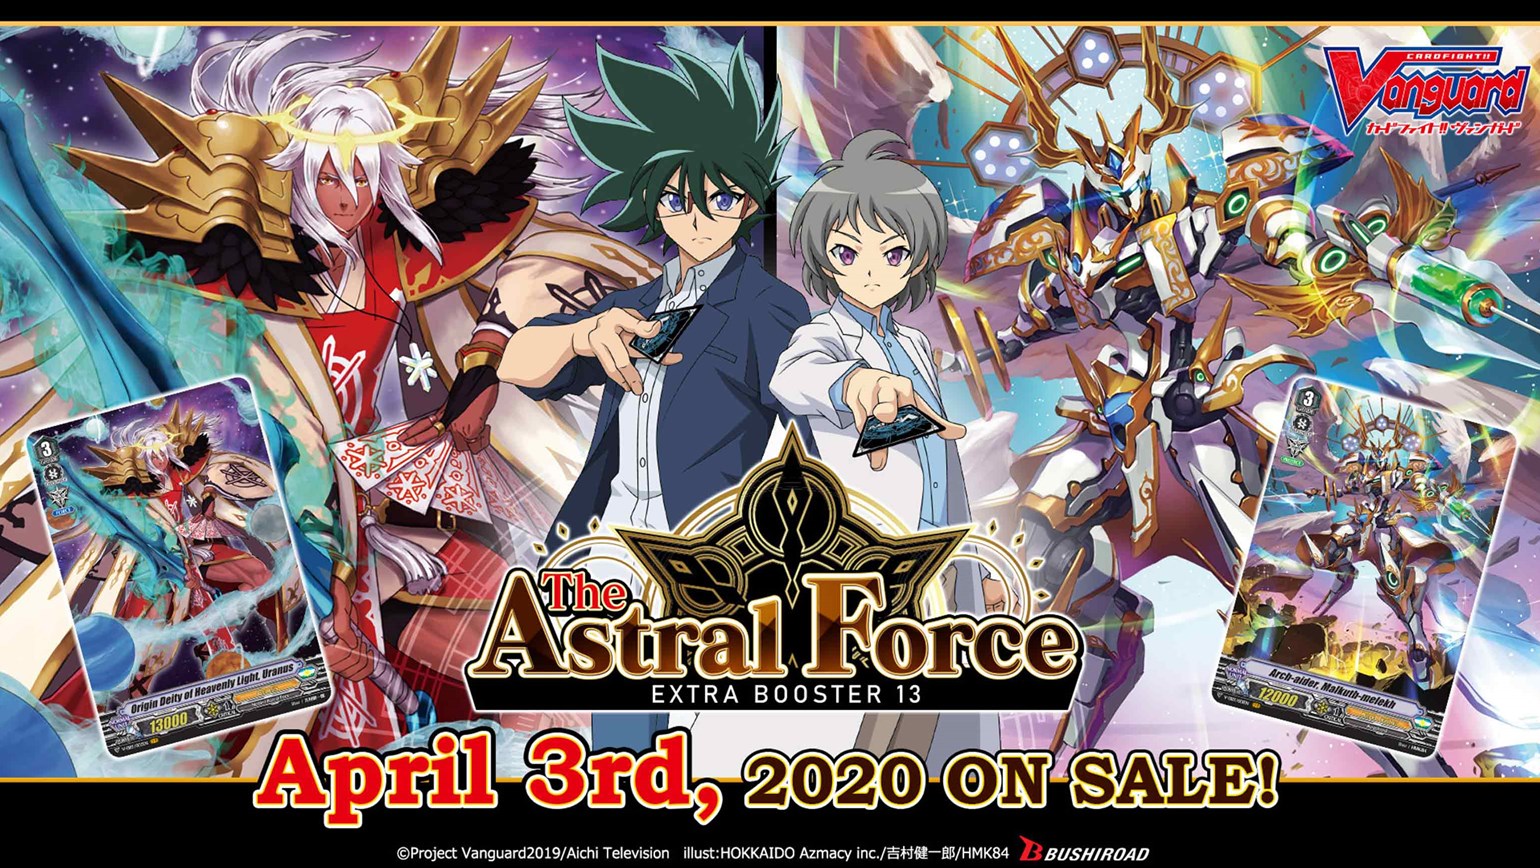 English Edition Cardfight!! Vanguard Extra Booster 13: The Astral Force Coming April 3rd